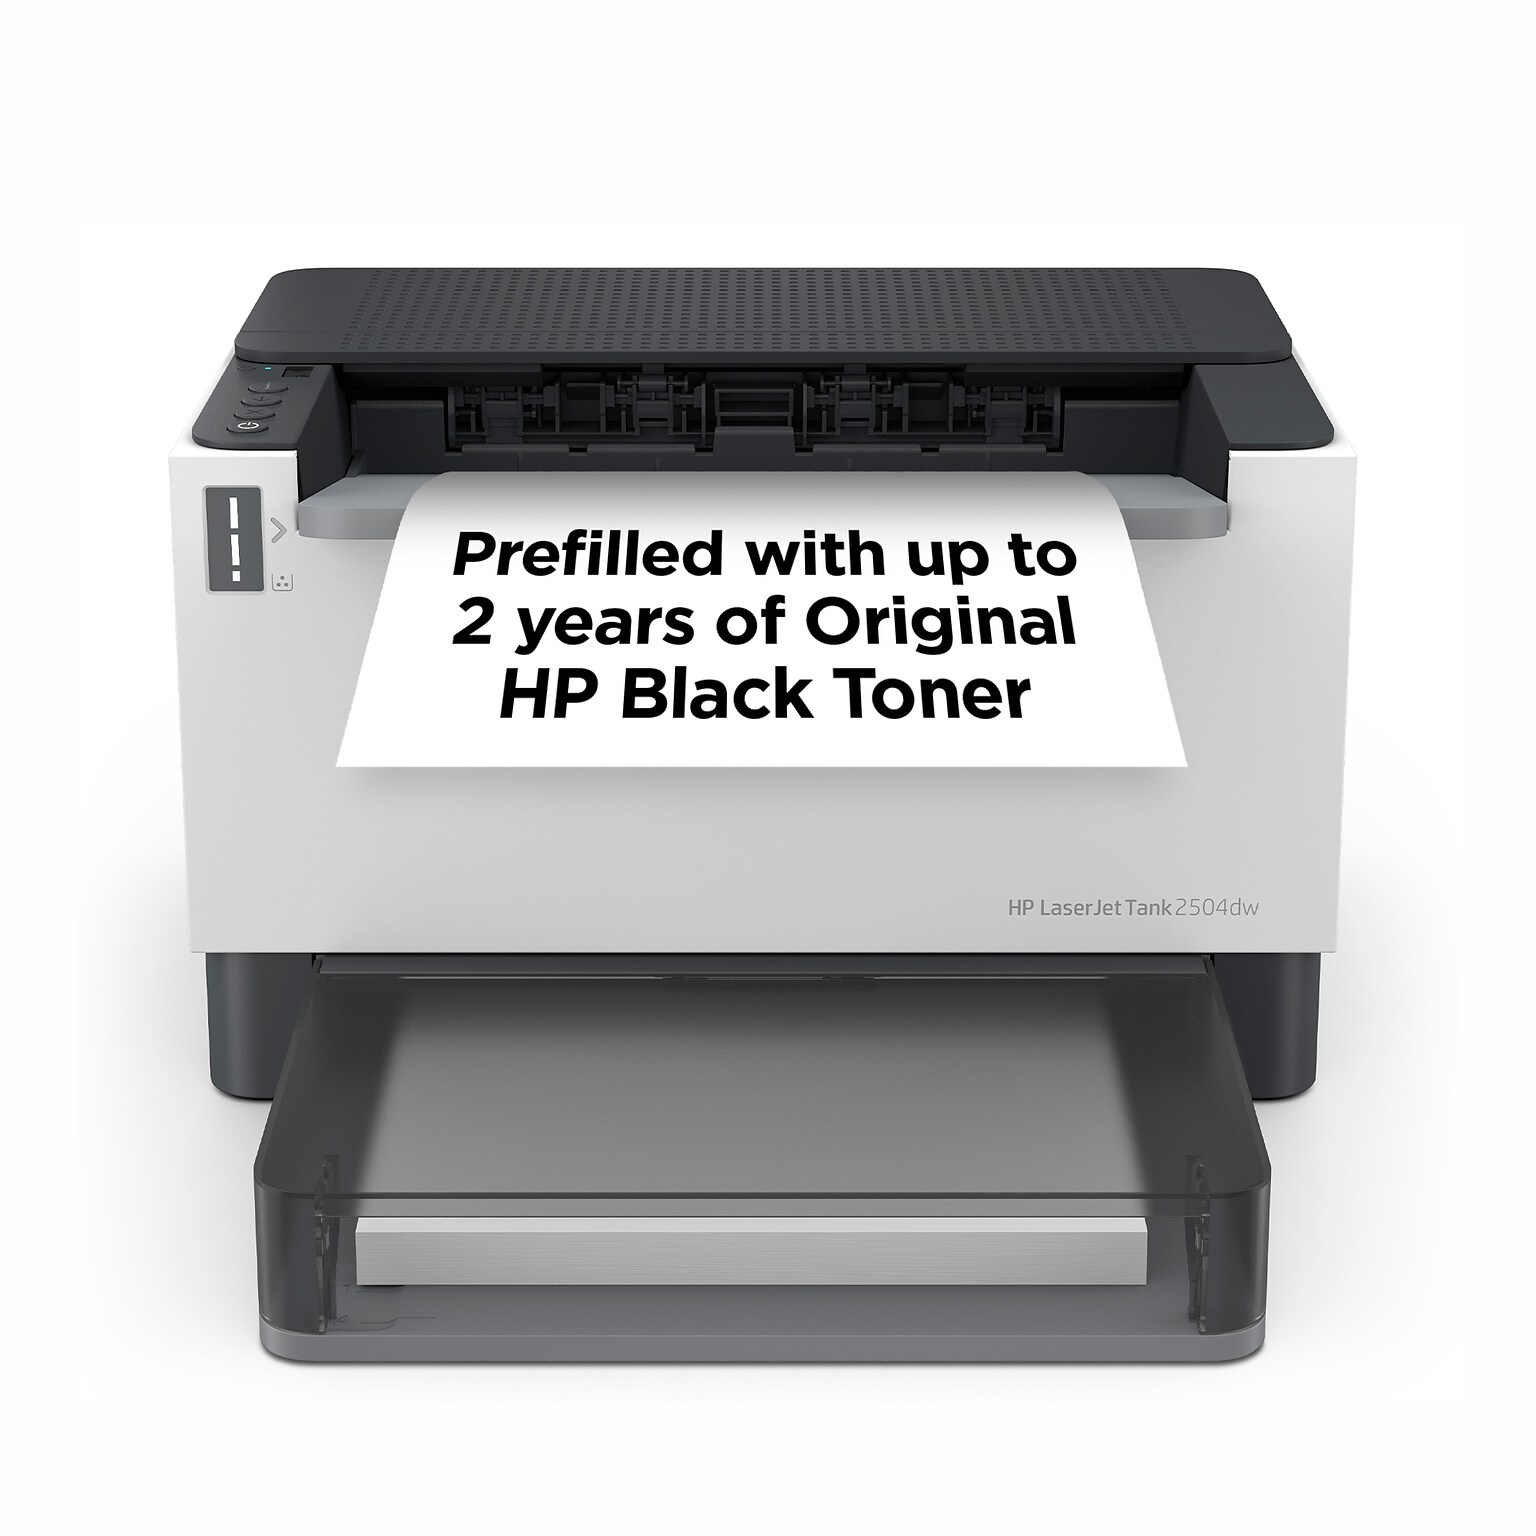 2504dw Wireless Black & White Refillable Laser Printer Prefilled with Up to 2 Years |